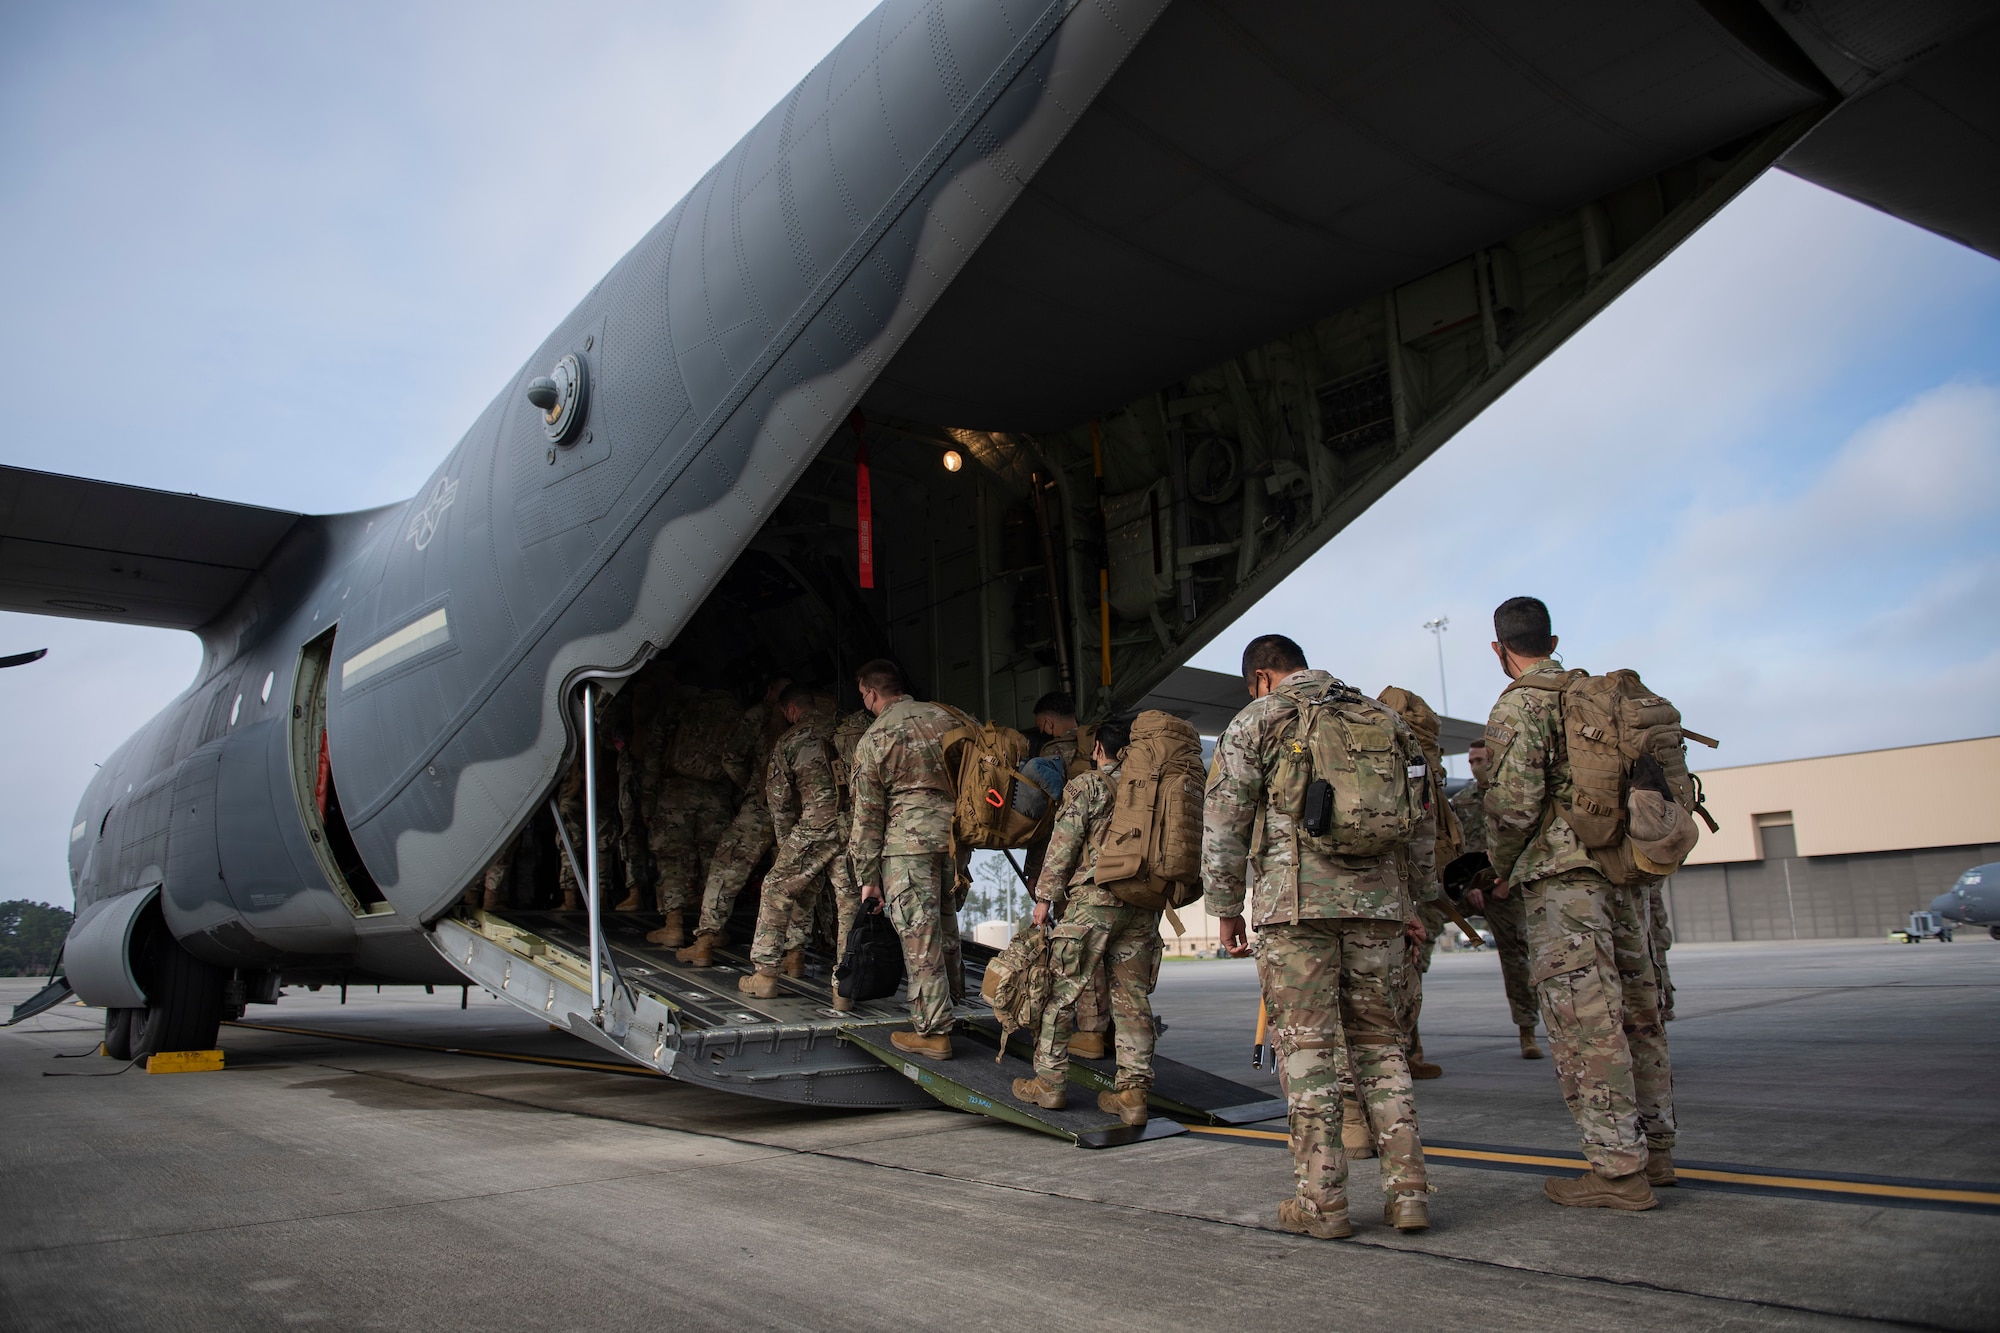 U.S. Air Force Airmen from the 822nd Base Defense Squadron load into an HC-130J Combat King II cargo aircraft from the 71st Rescue Squadron at Moody Air Force Base, Georgia, Aug. 28, 2021. More than 160 Airmen were transported to Holloman Air Force Base, New Mexico in support of Task Force – Holloman. The Department of Defense, through U.S. Northern Command, and in support of the Department of Homeland Security, is providing transportation, temporary housing, medical screening, and general support for up to 50,000 Afghan evacuees at suitable facilities, in permanent or temporary structures, as quickly as possible. This initiative provides Afghan personnel essential support at secure locations outside Afghanistan. (U.S. Air Force photo by Master Sgt. Daryl Knee)